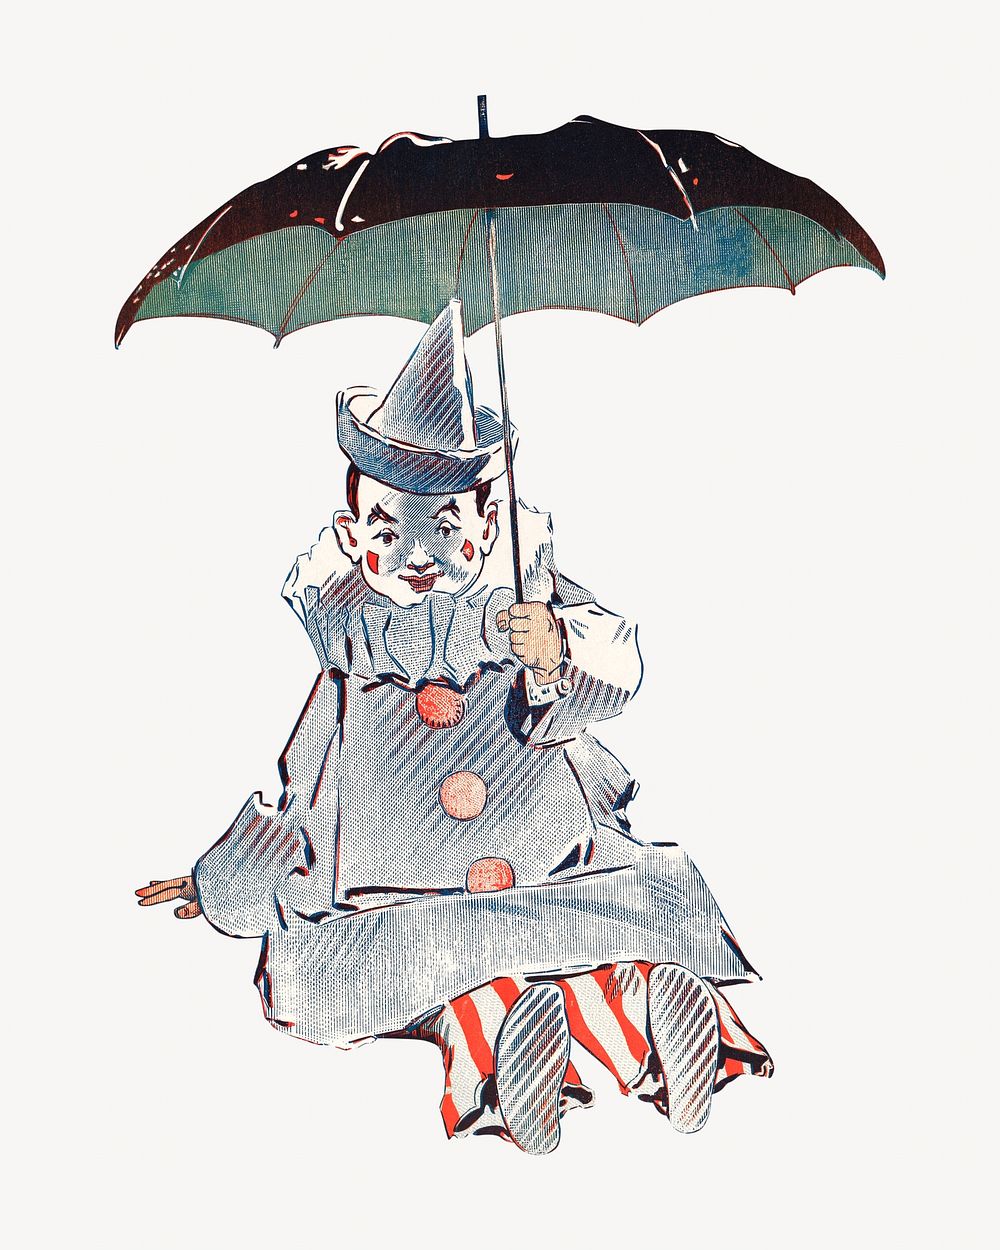 Clown holding umbrella, vintage illustration by George Reiter Brill.  Remixed by rawpixel. 